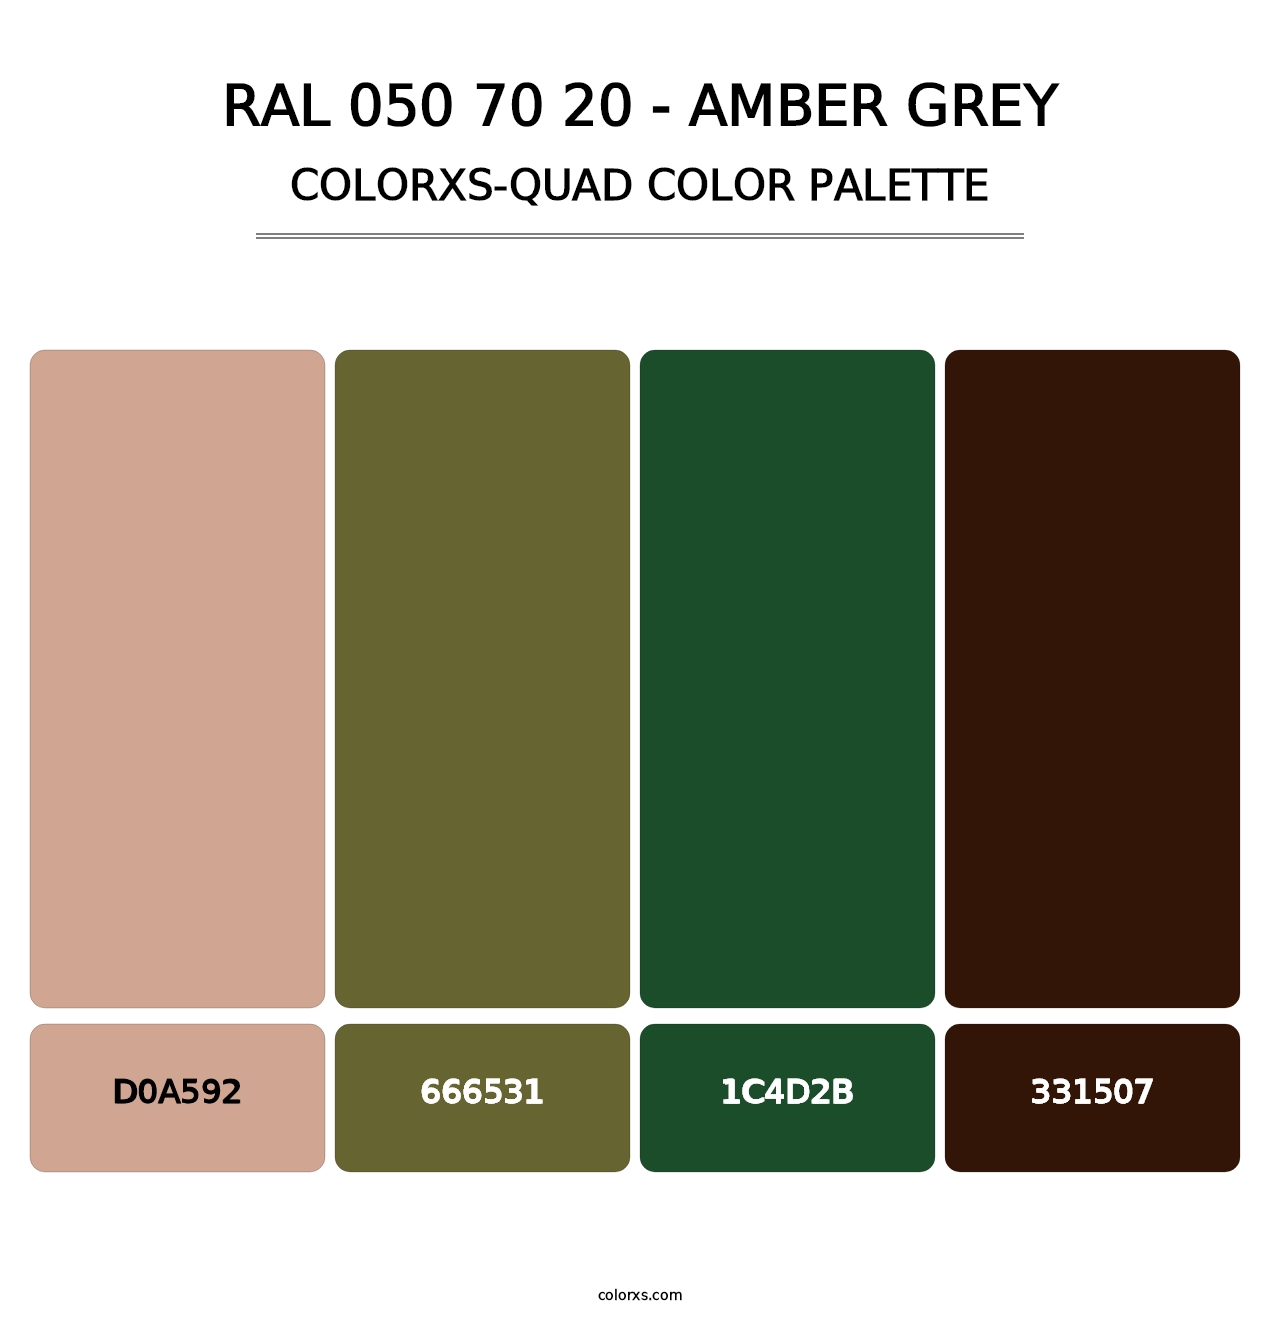 RAL 050 70 20 - Amber Grey - Colorxs Quad Palette